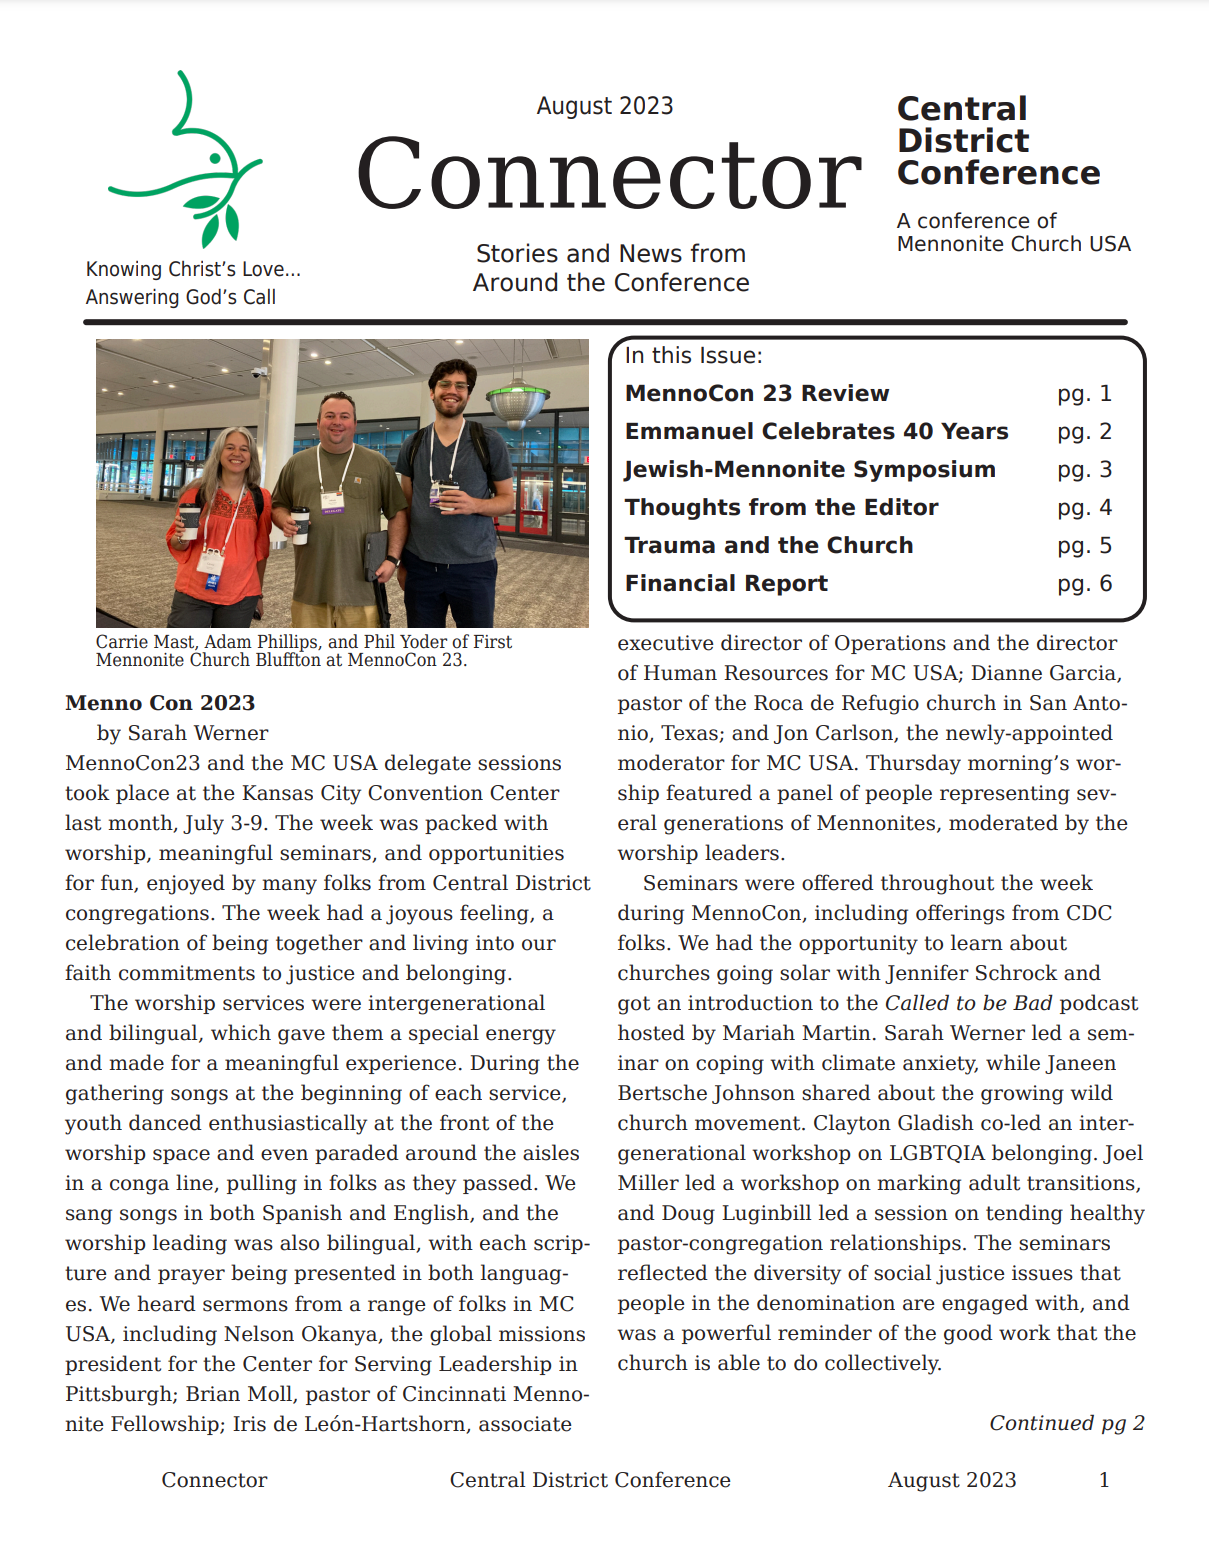 CDC Connector - August 2023 issue